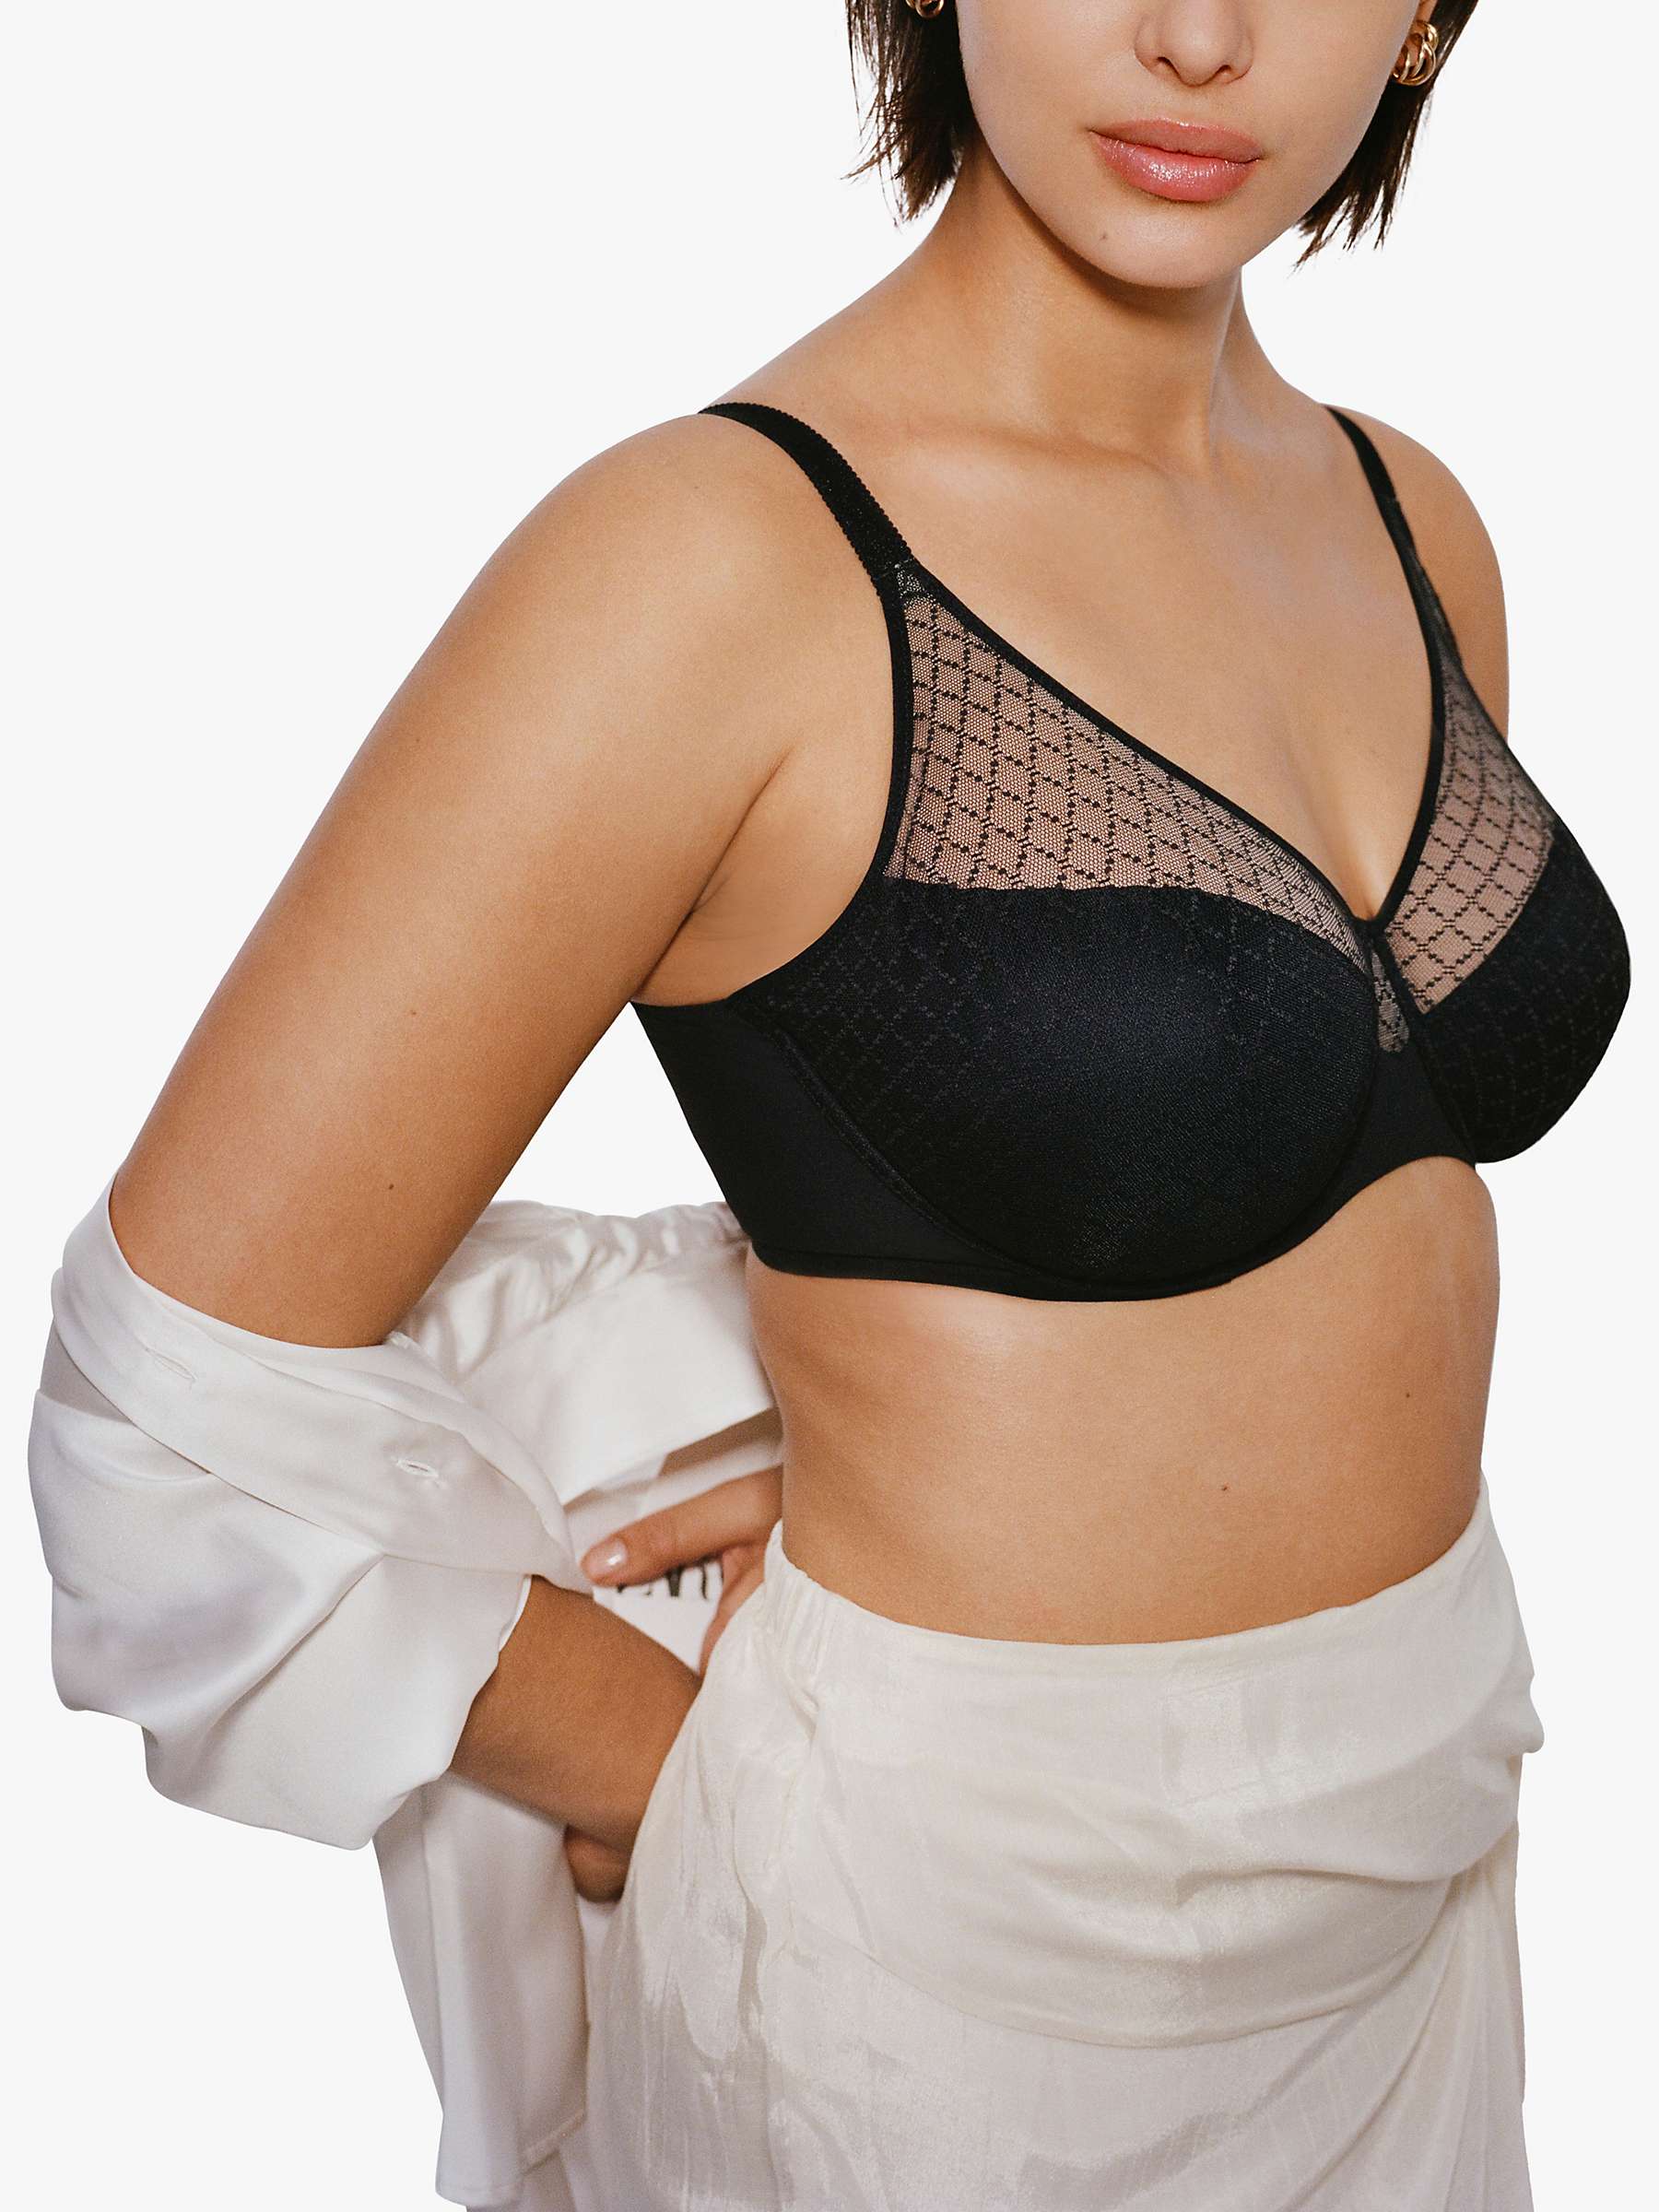 Buy Chantelle Norah Chic Moulded Underwire Bra Online at johnlewis.com